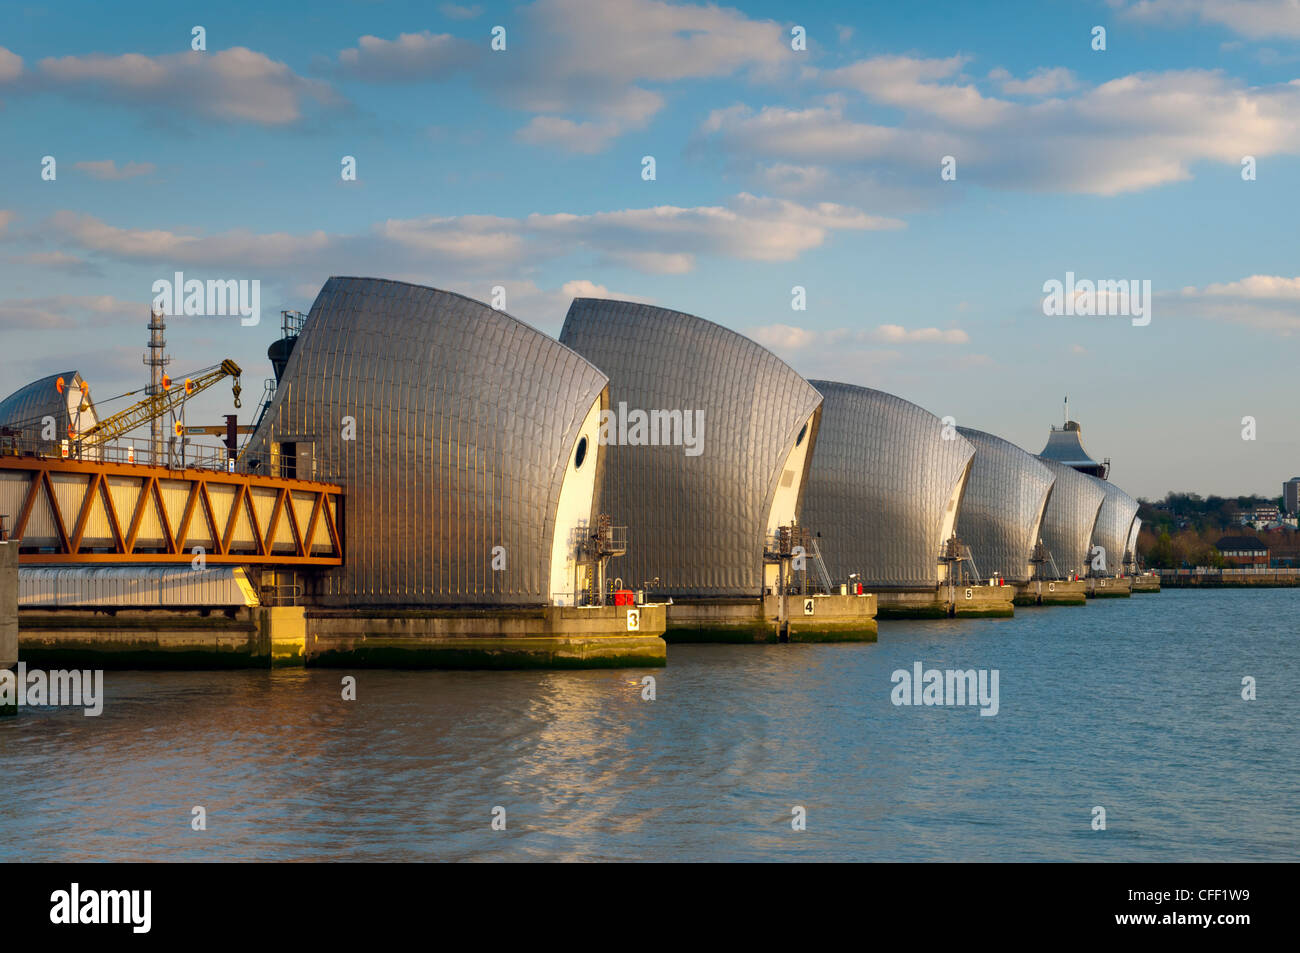 Thames Barrier, Woolwich, Londres, Angleterre, Royaume-Uni, Europe Banque D'Images